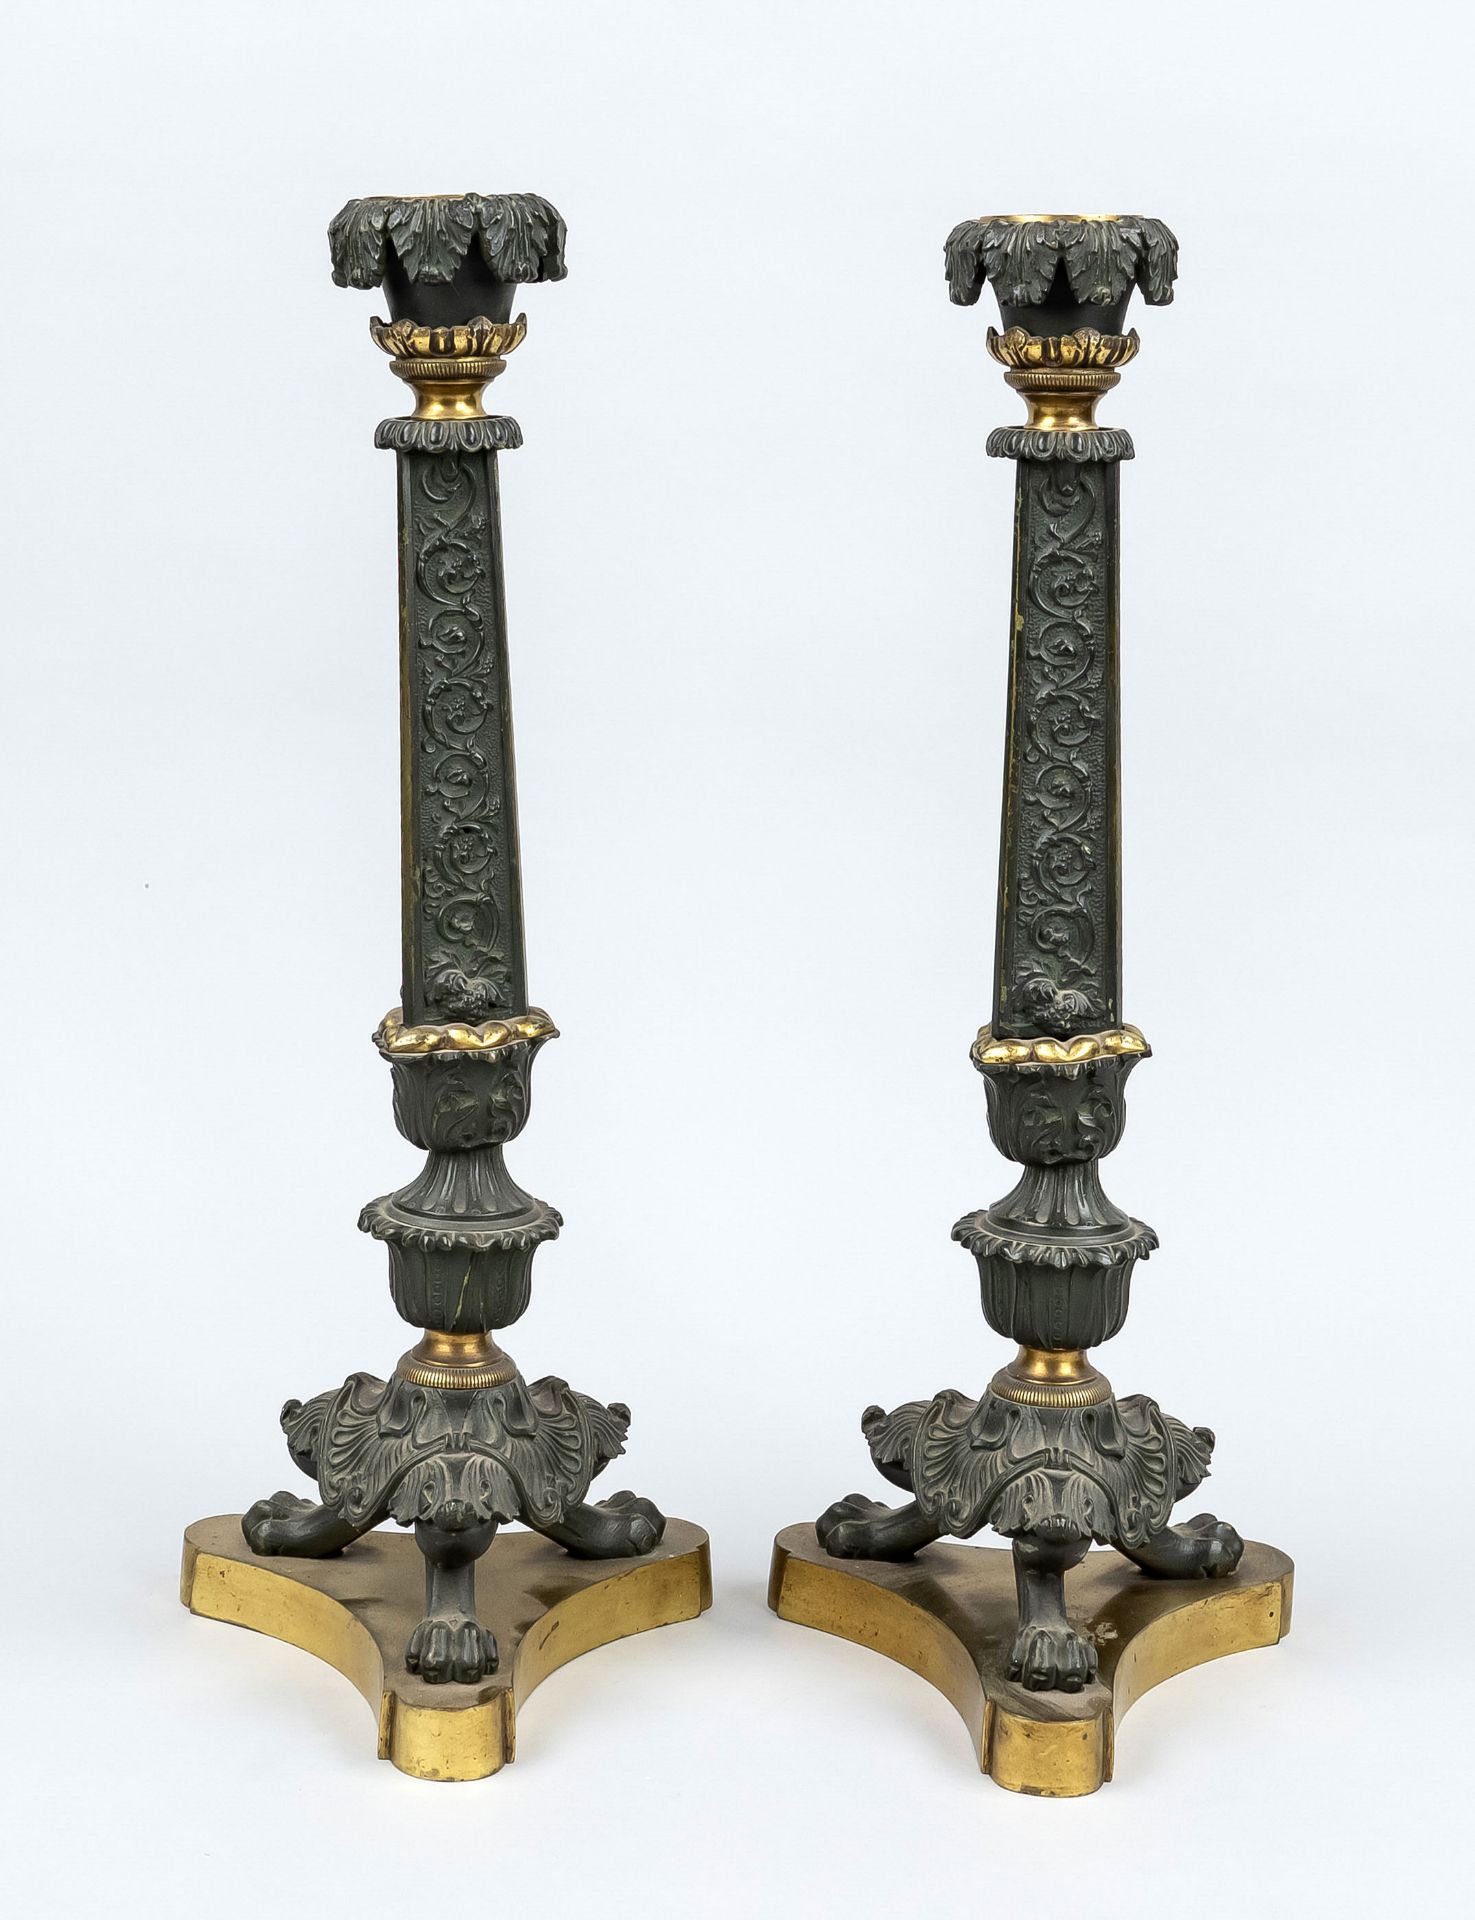 Pair of Empire style candlesticks, 19th century, bronze partially gilded. Tripod base, tripod with